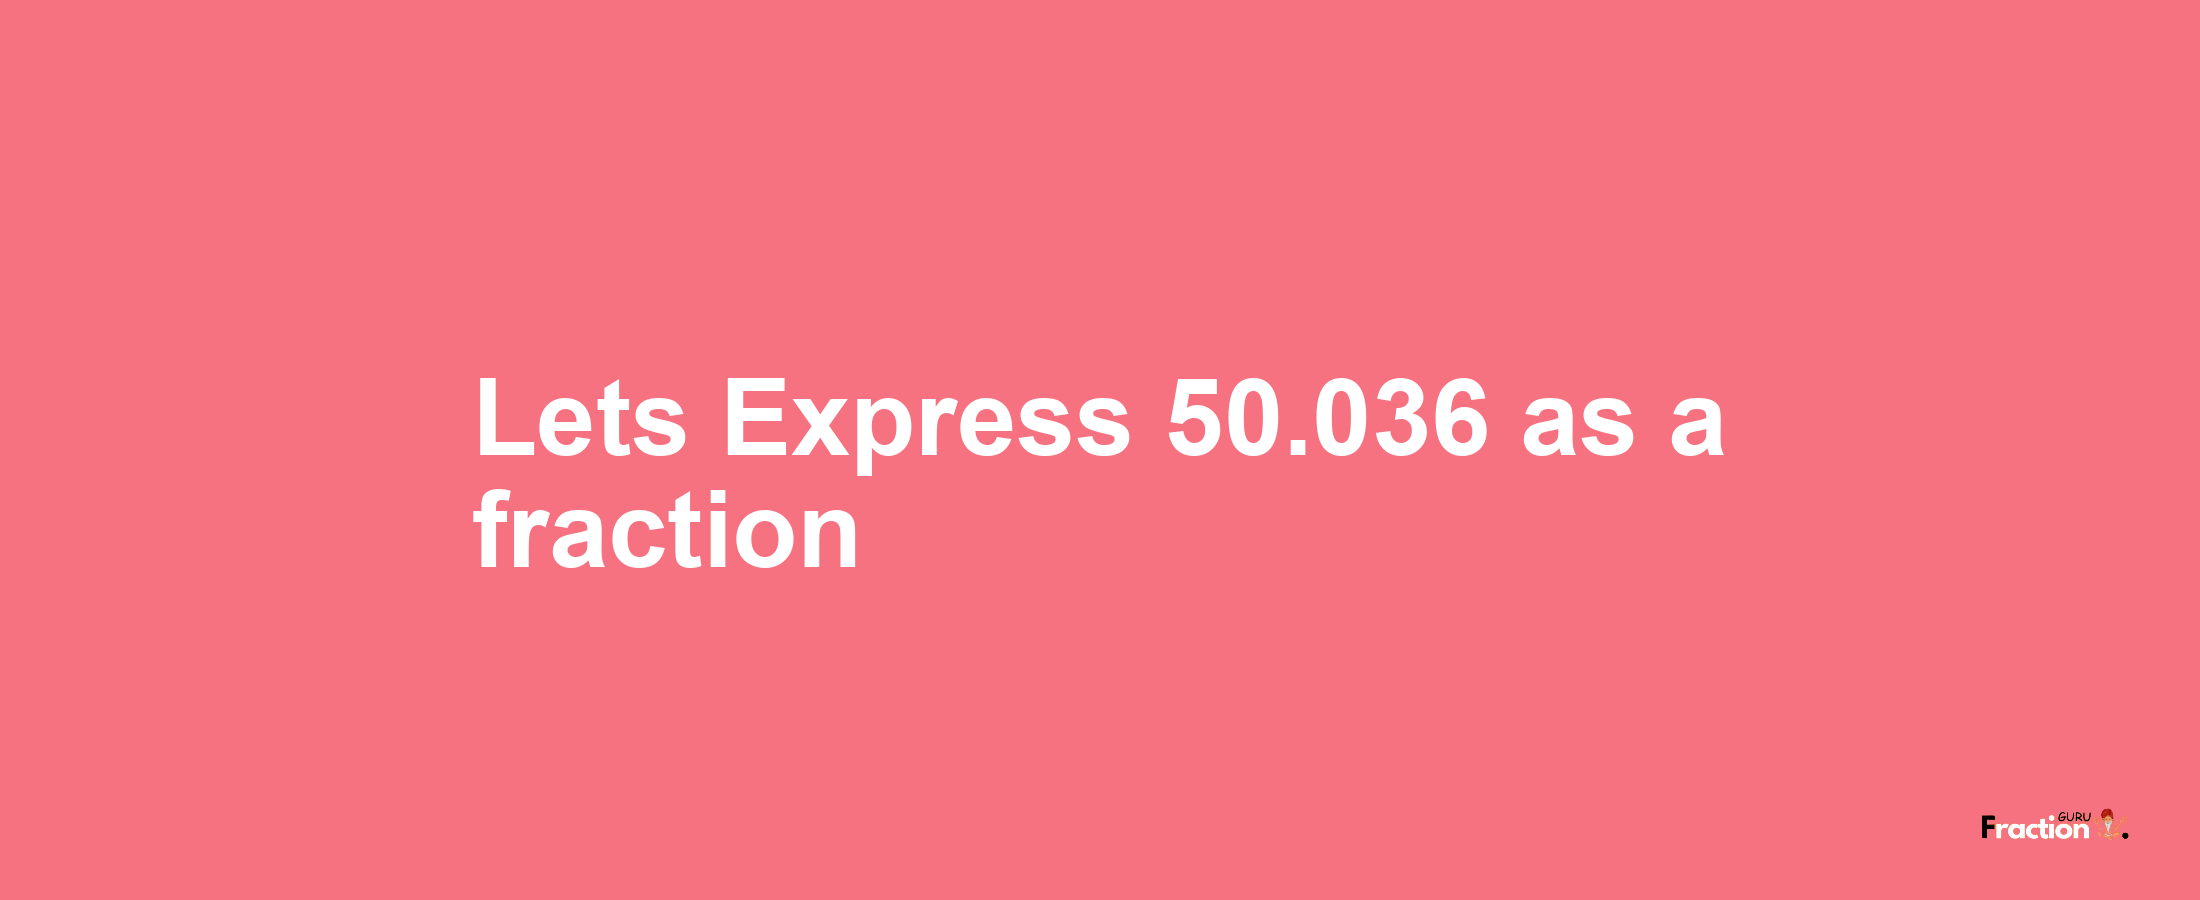 Lets Express 50.036 as afraction